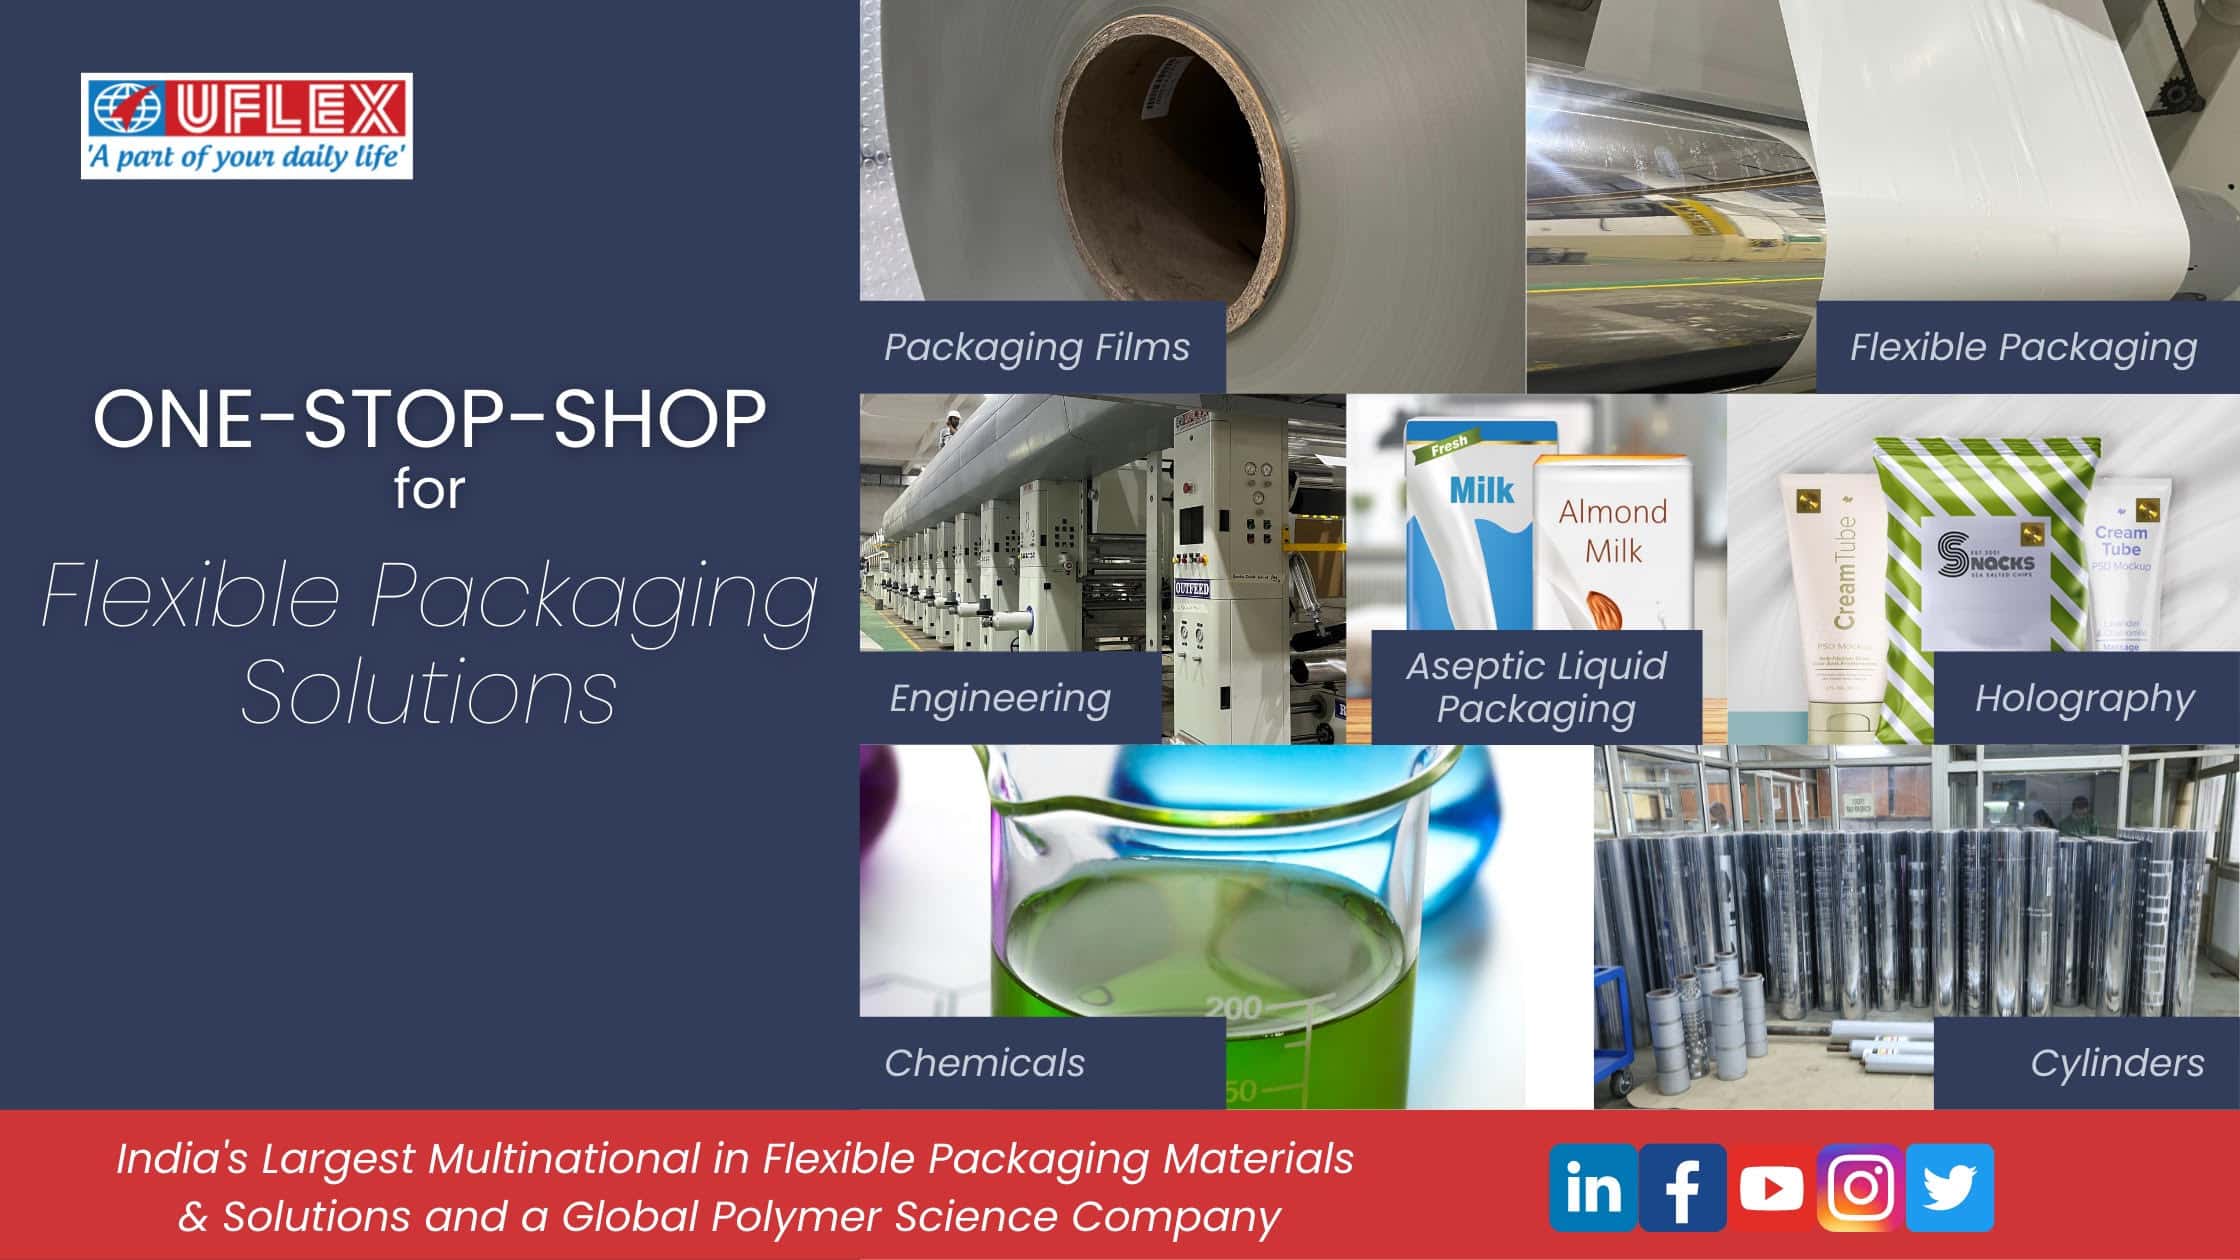 The Passion for Packaging – Cover Story in the June 2018 Edition of What Packaging? by Print Week India